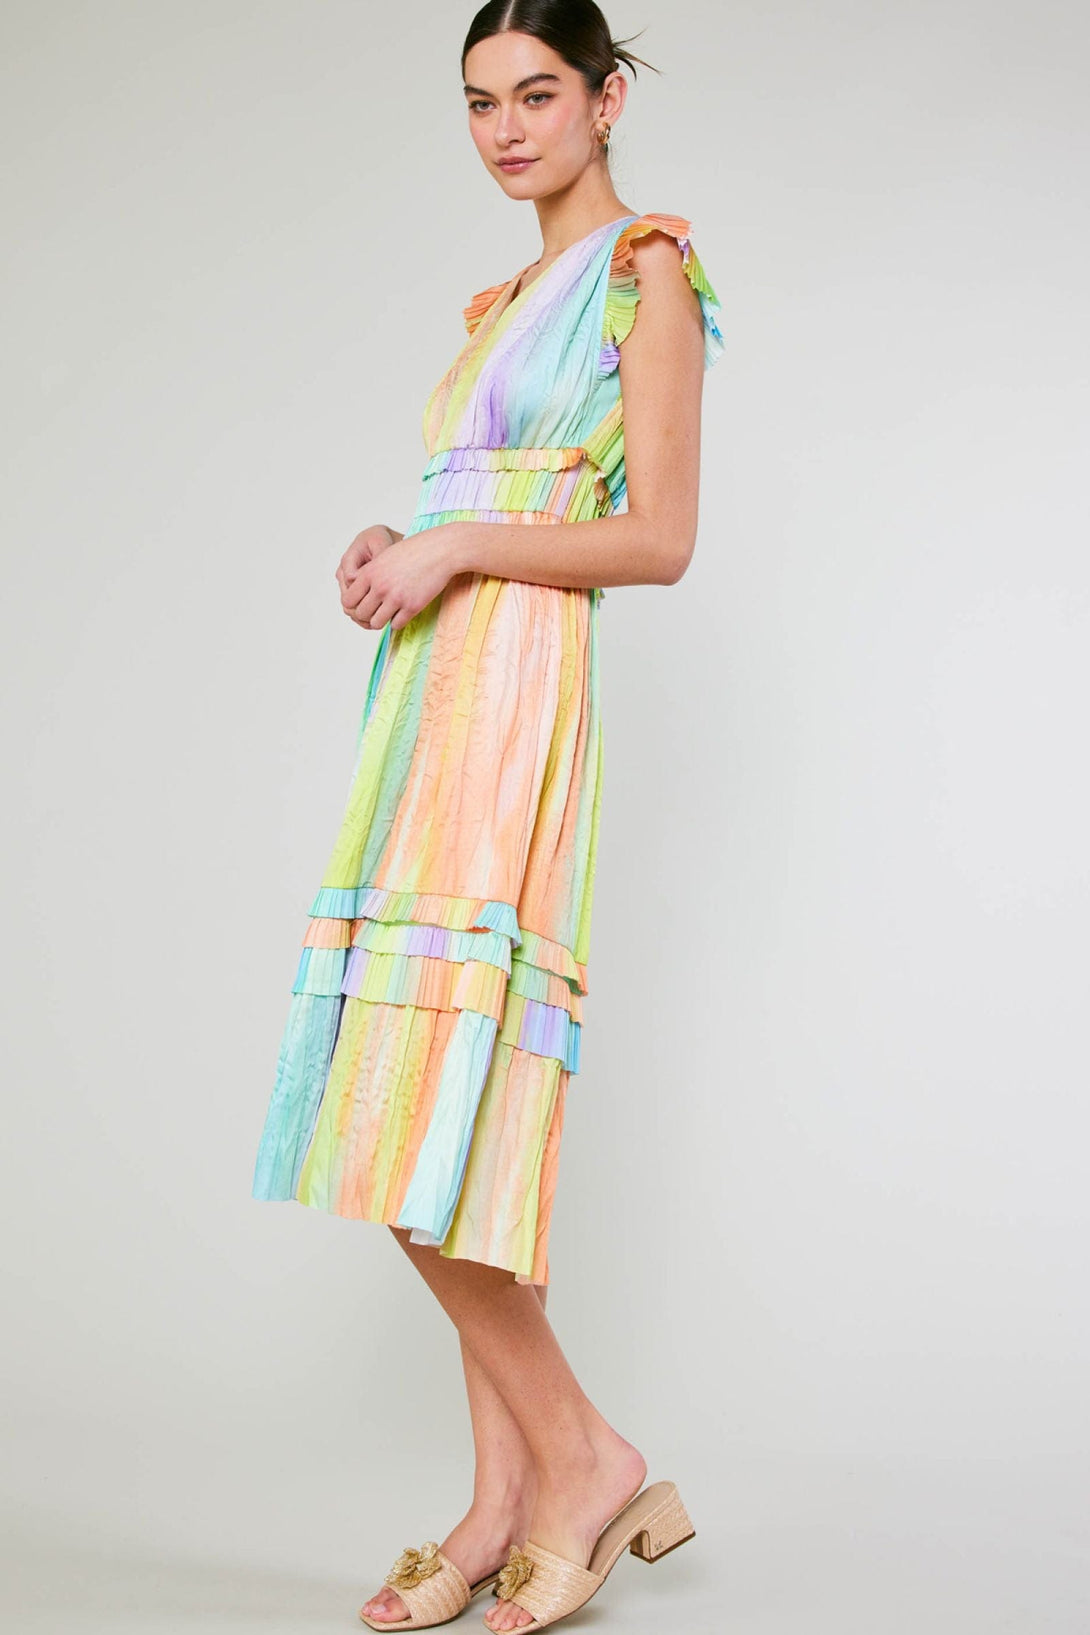 Current Air V Neck Pleated Short Sleeve Ruffle Long Dress